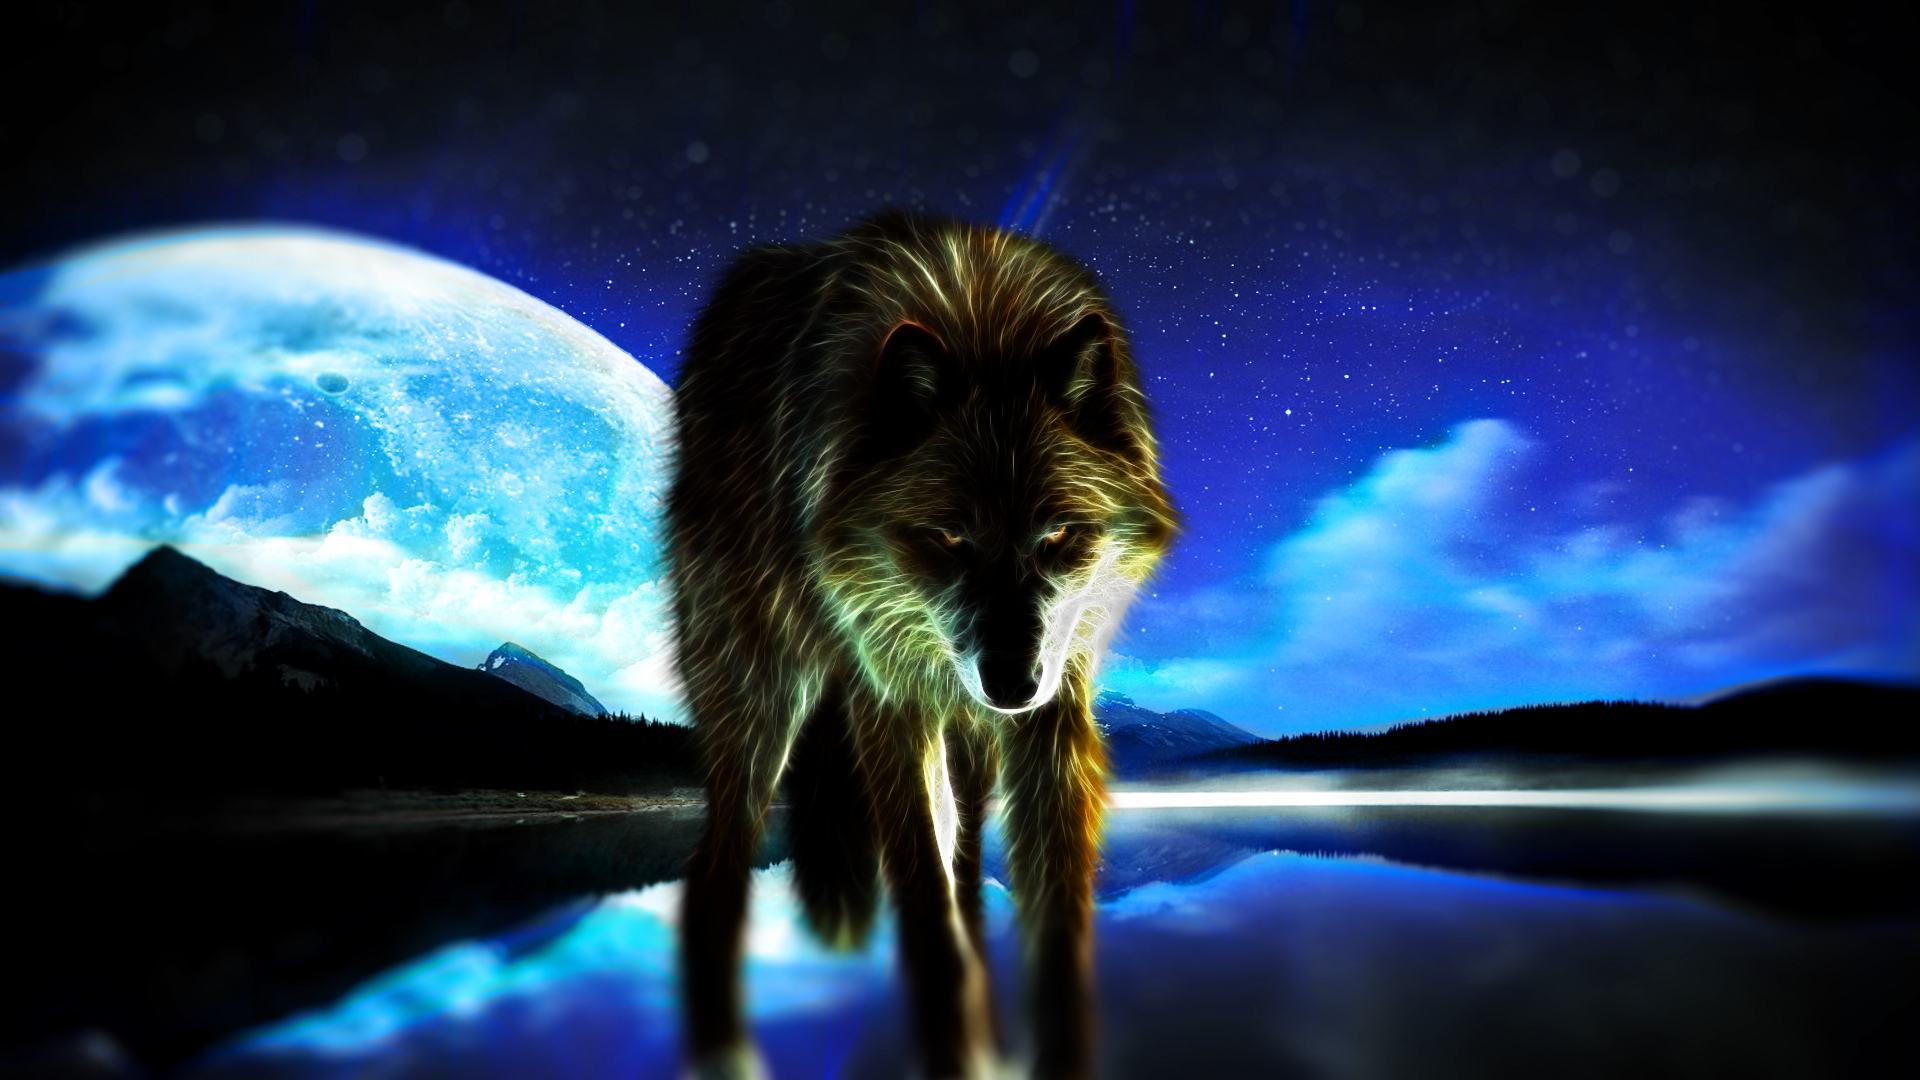 Wolf with Moon Wallpaper by Hardii on